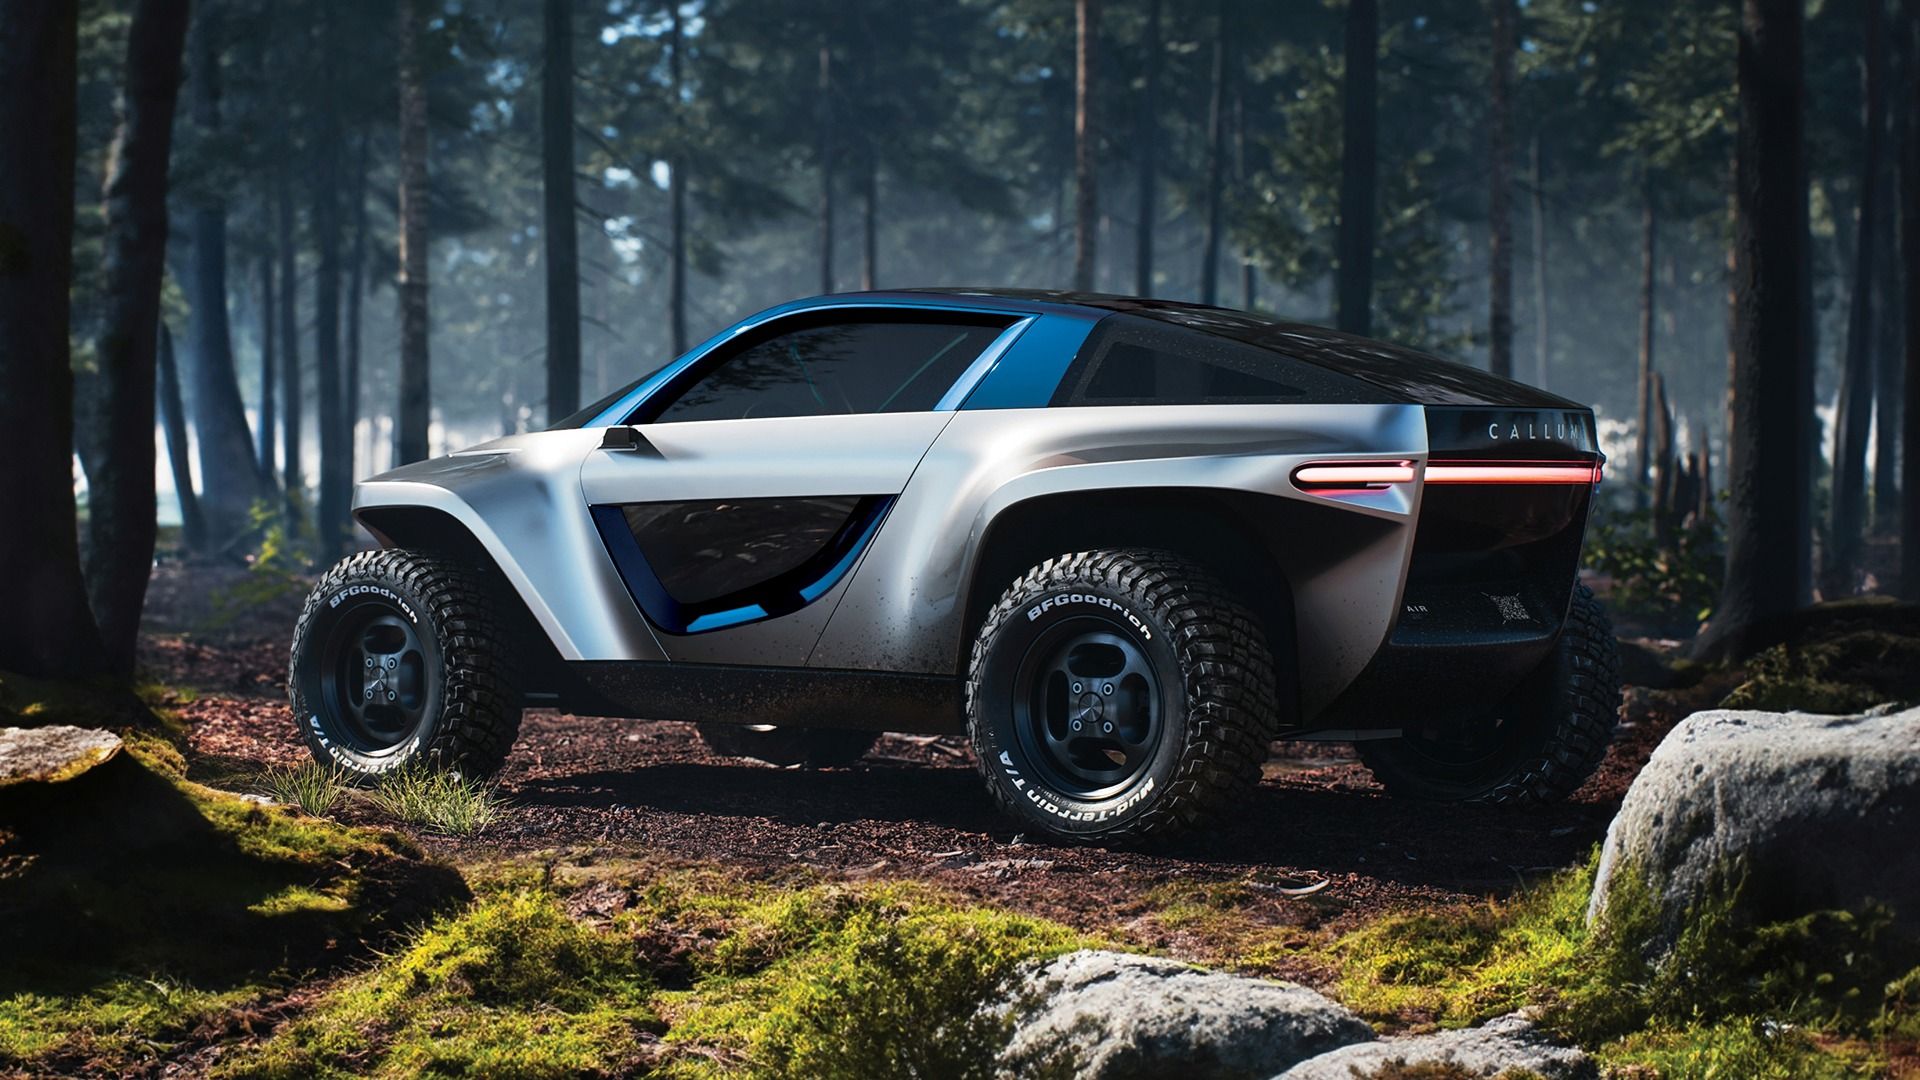 The Callum Skye Is A $140,000 Electric Off-Roader With Futuristic Styling